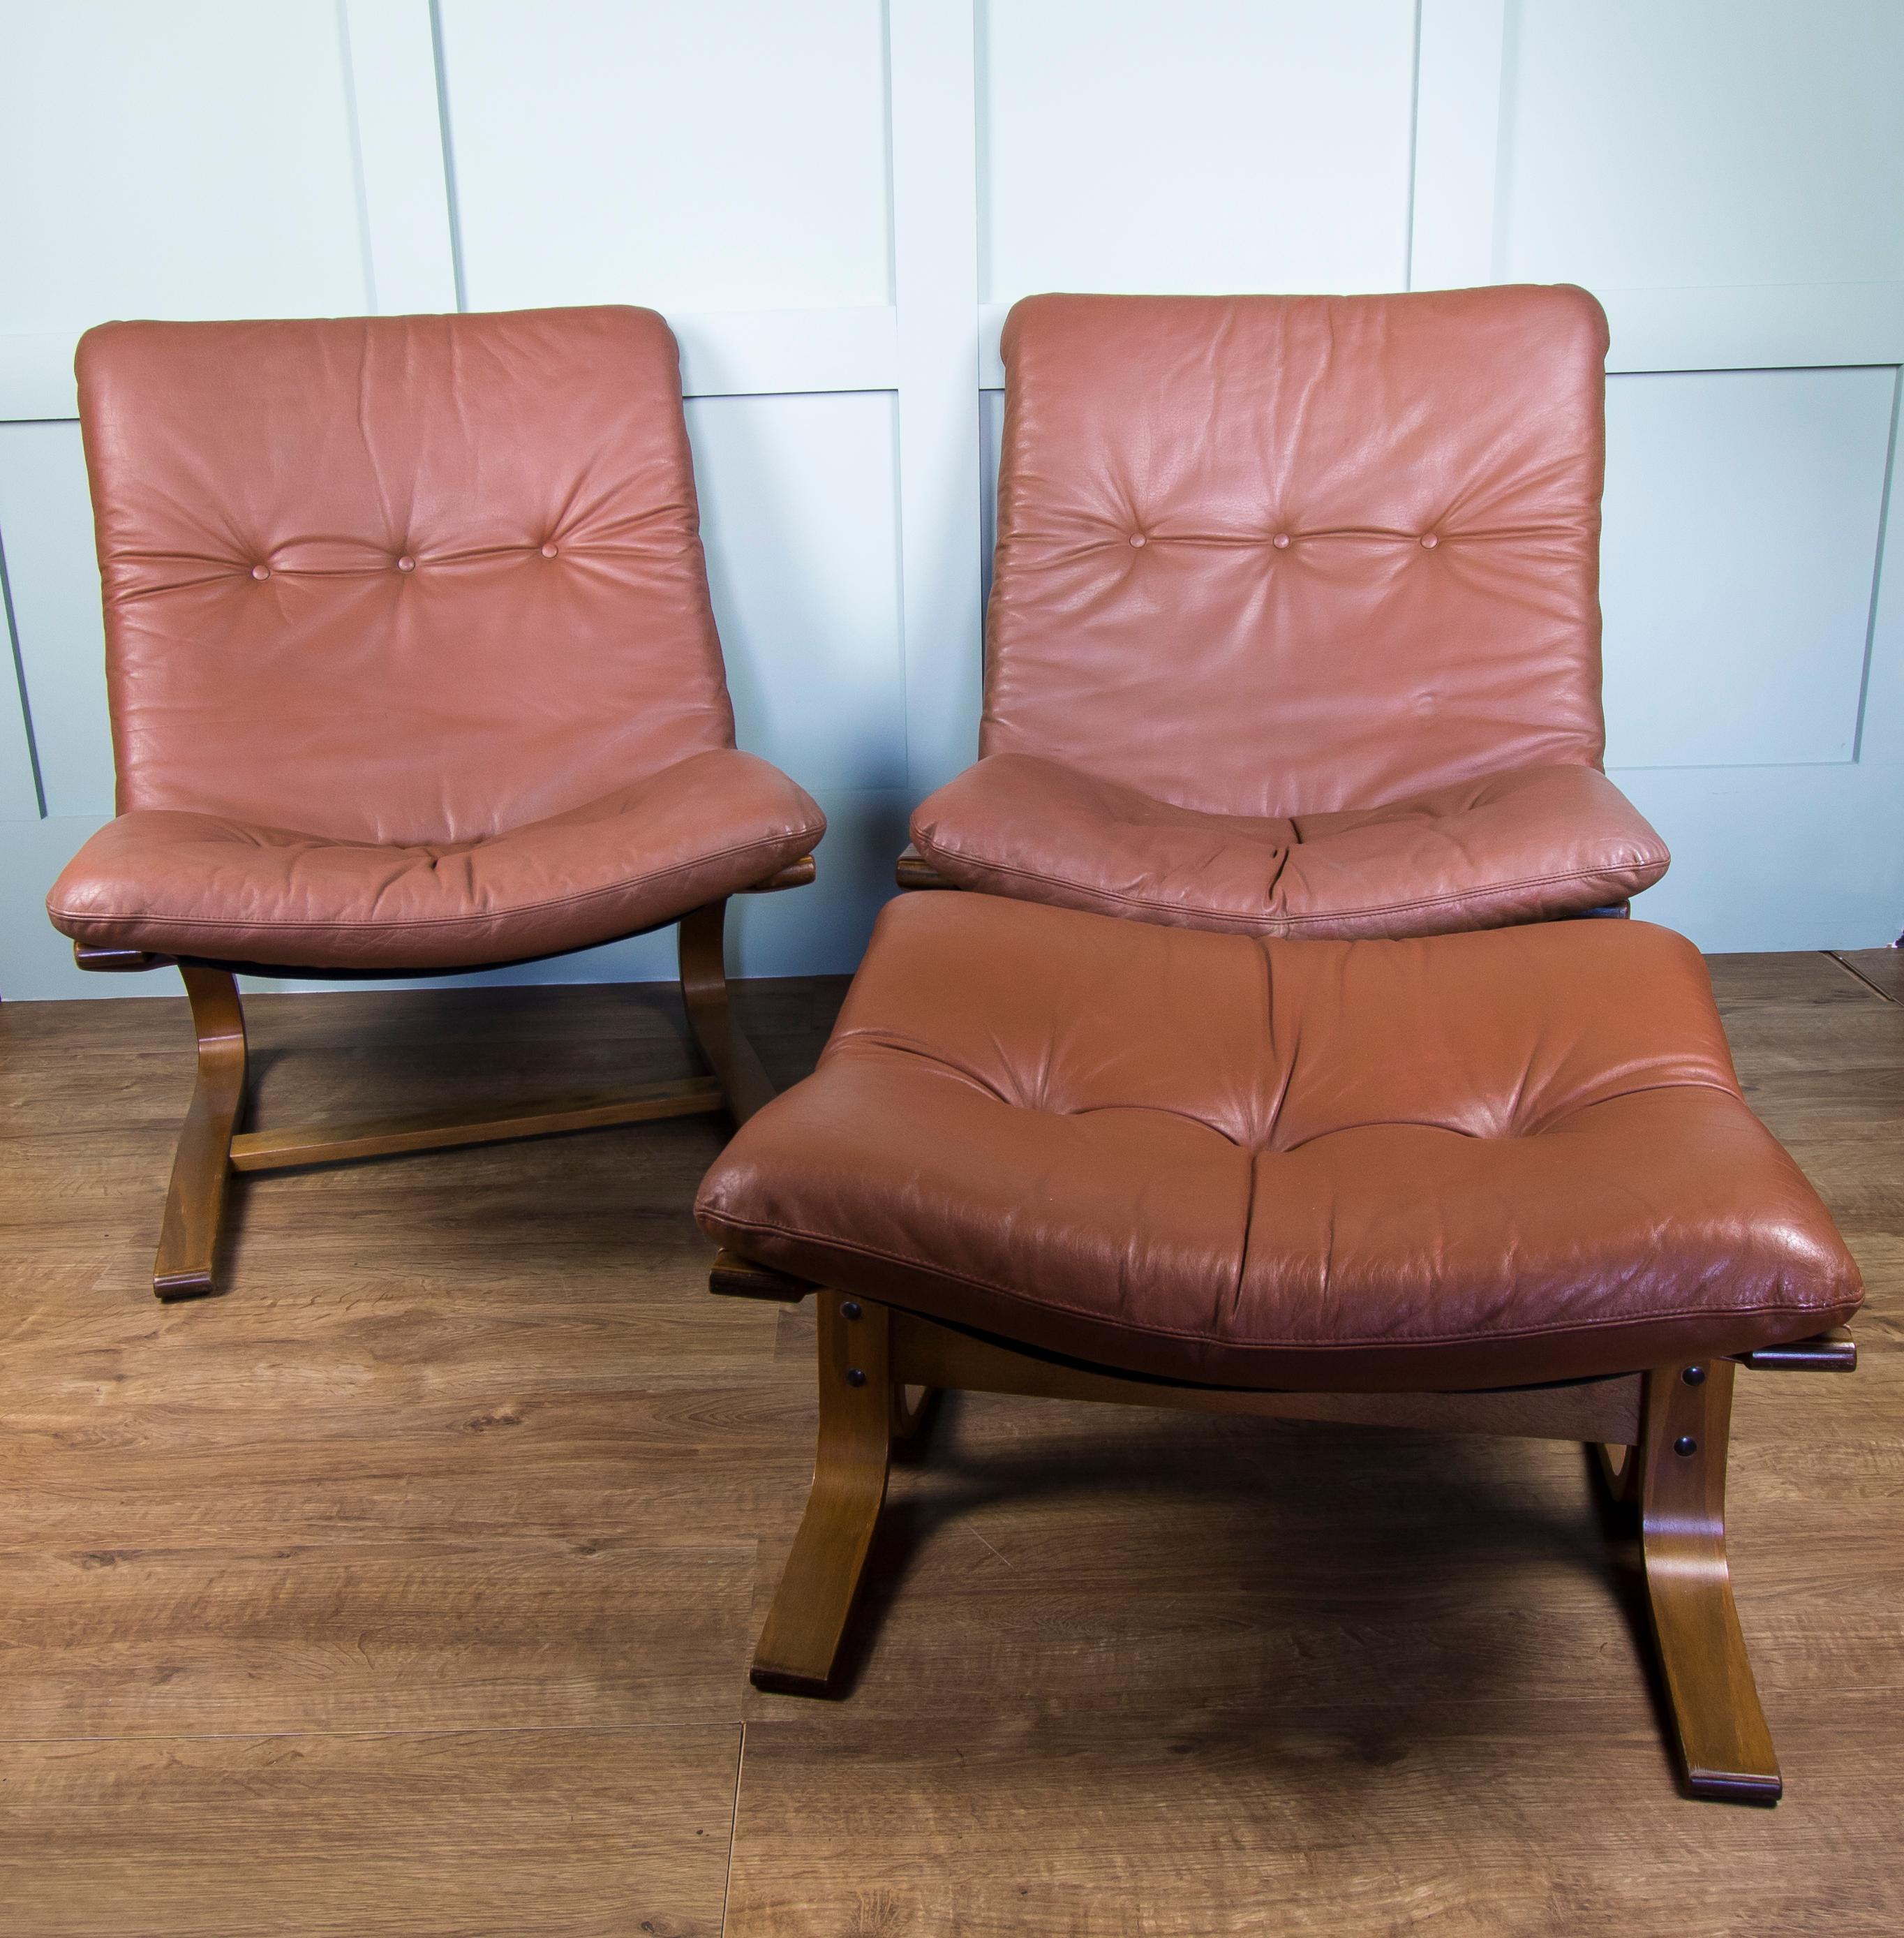 A pair of mid brown armchairs with pale bentwood frames with matching footstool from the late 1960s, early 1970s designed by Elsa & Nordahl Solheim for Rybo Rykken, Norway. The cantilever base is made from natural colour bentwood with a stable black